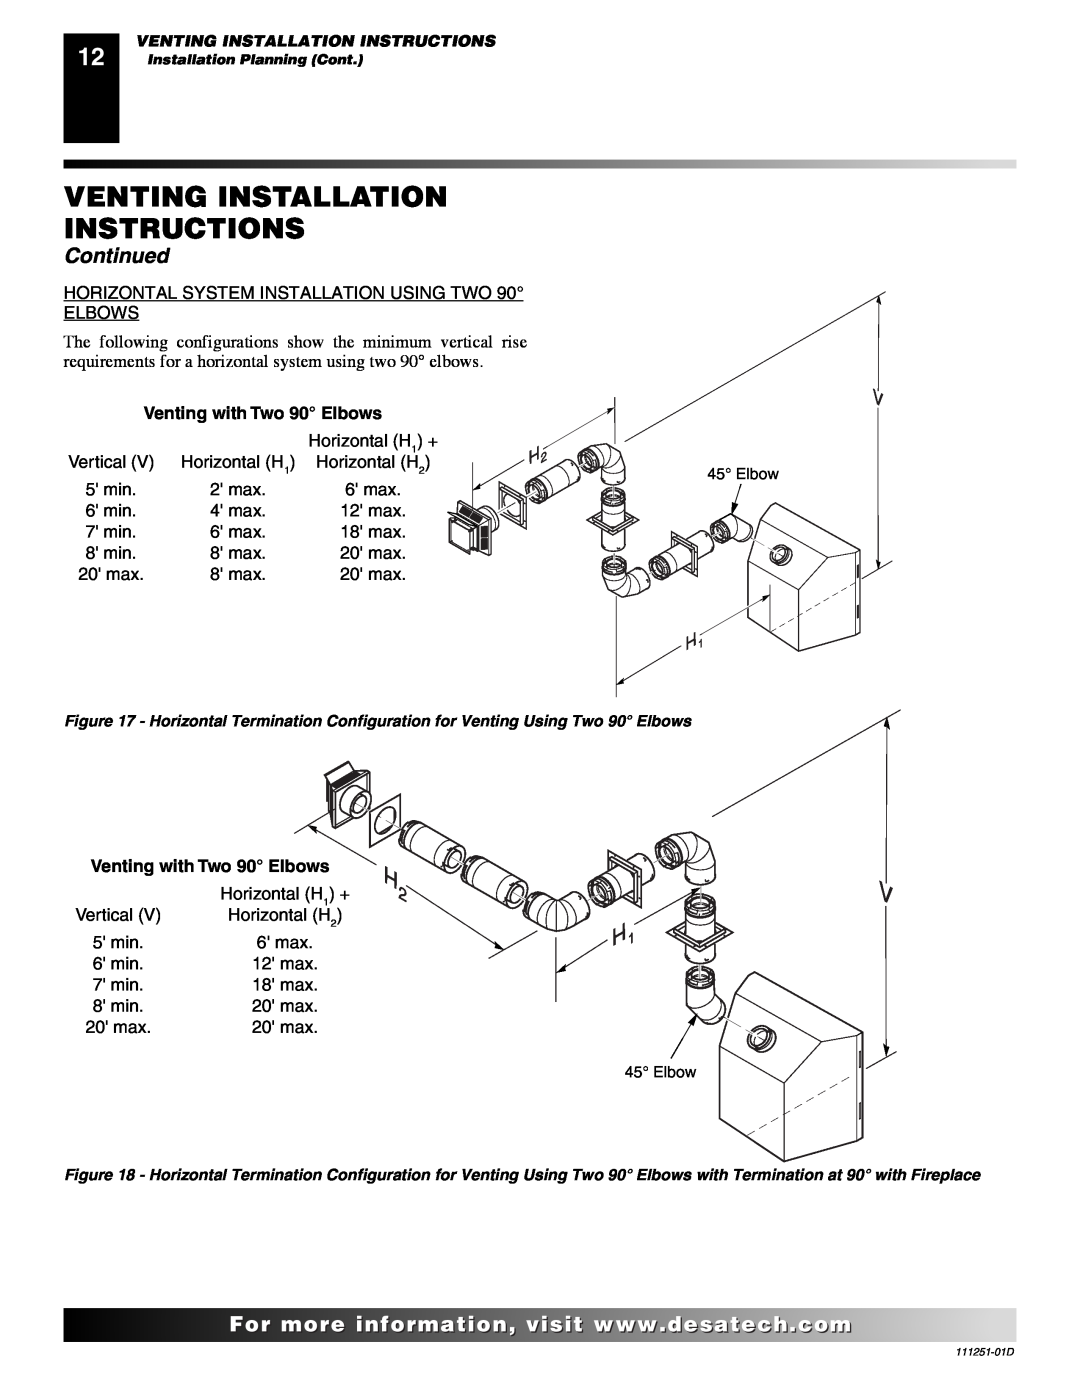 Desa (V)T36EPA SERIES, (V)T36ENA SERIES Venting Installation Instructions, Continued, Venting with Two 90 Elbows 